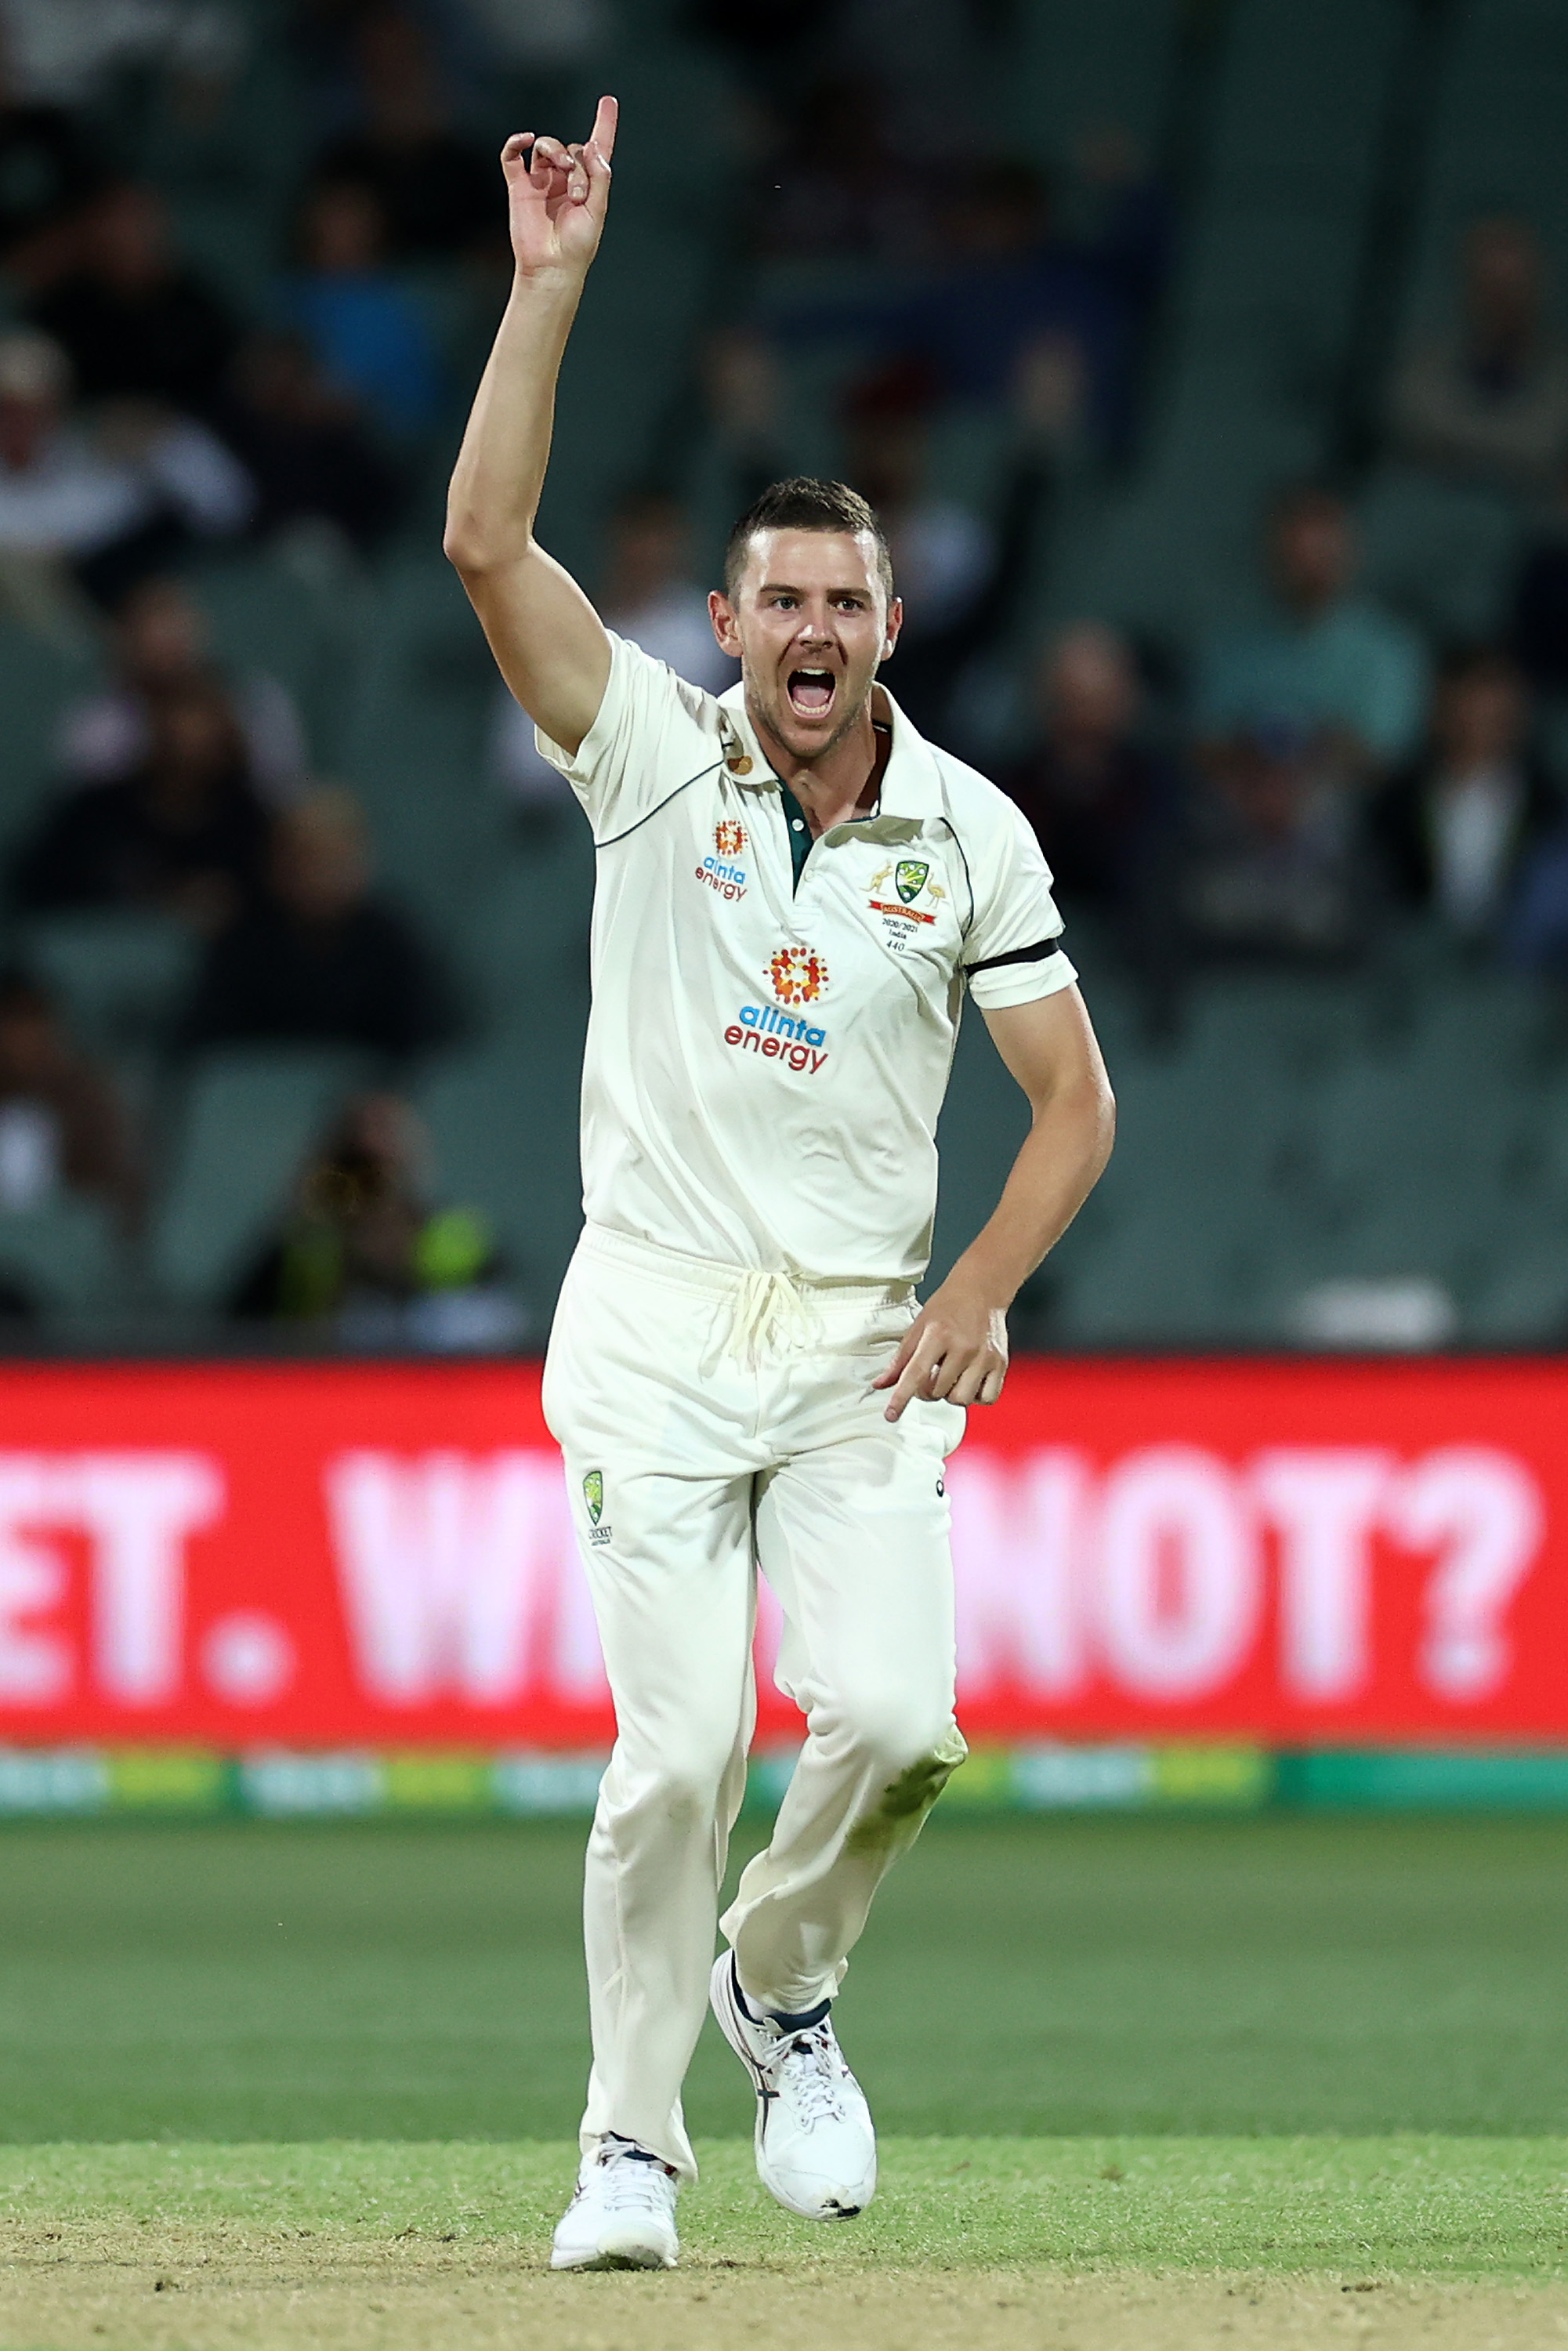 IND vs AUS 1st Test Adelaide 2020: India scored the lowest Test total ever 36/9 as Josh Hazlewood and Patt Cummins dominated India's side.